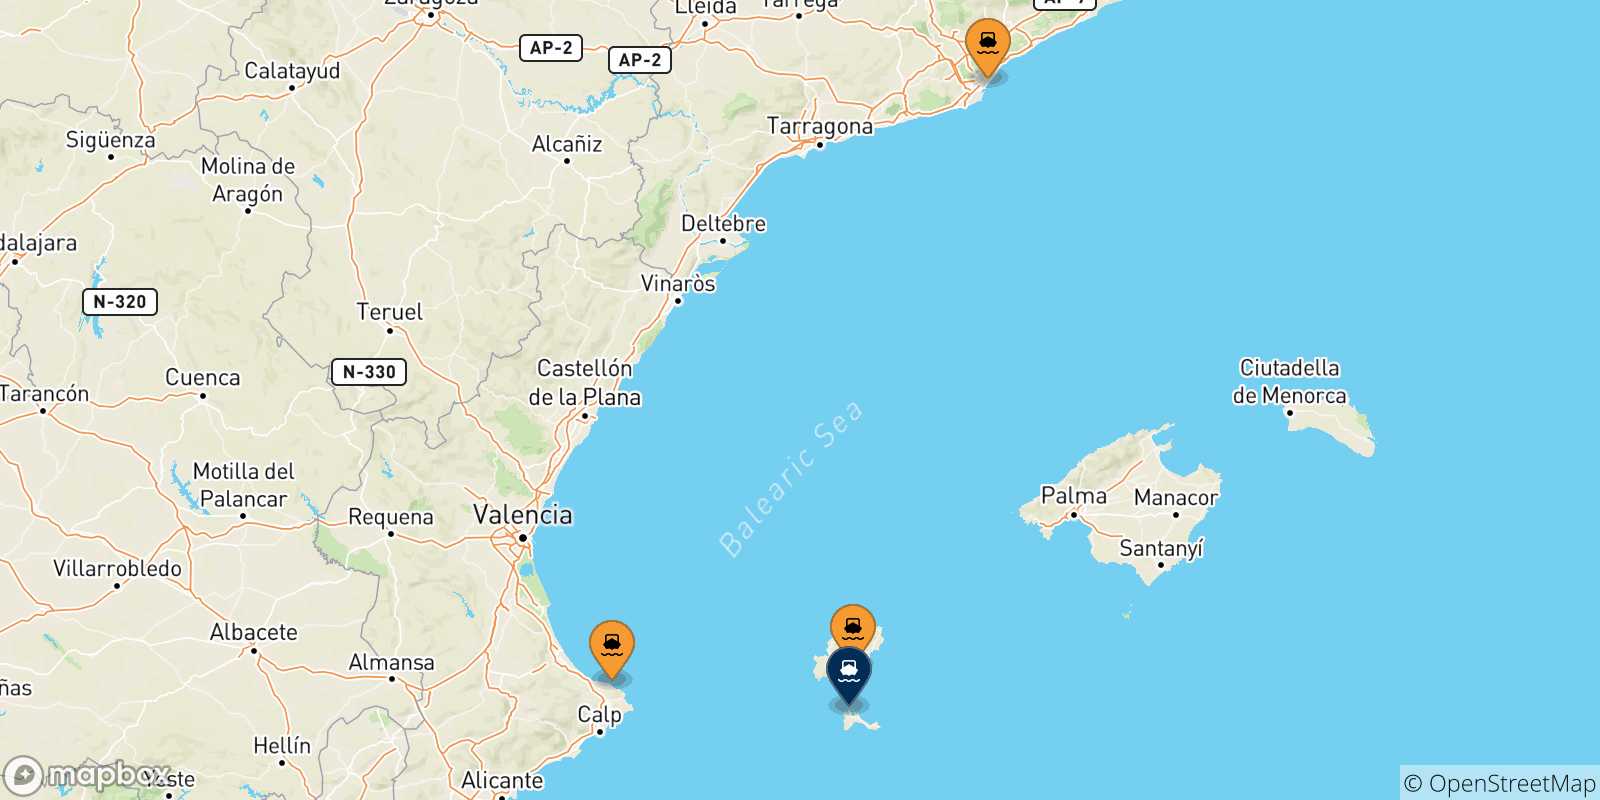 Map of the possible routes between Spain and Formentera